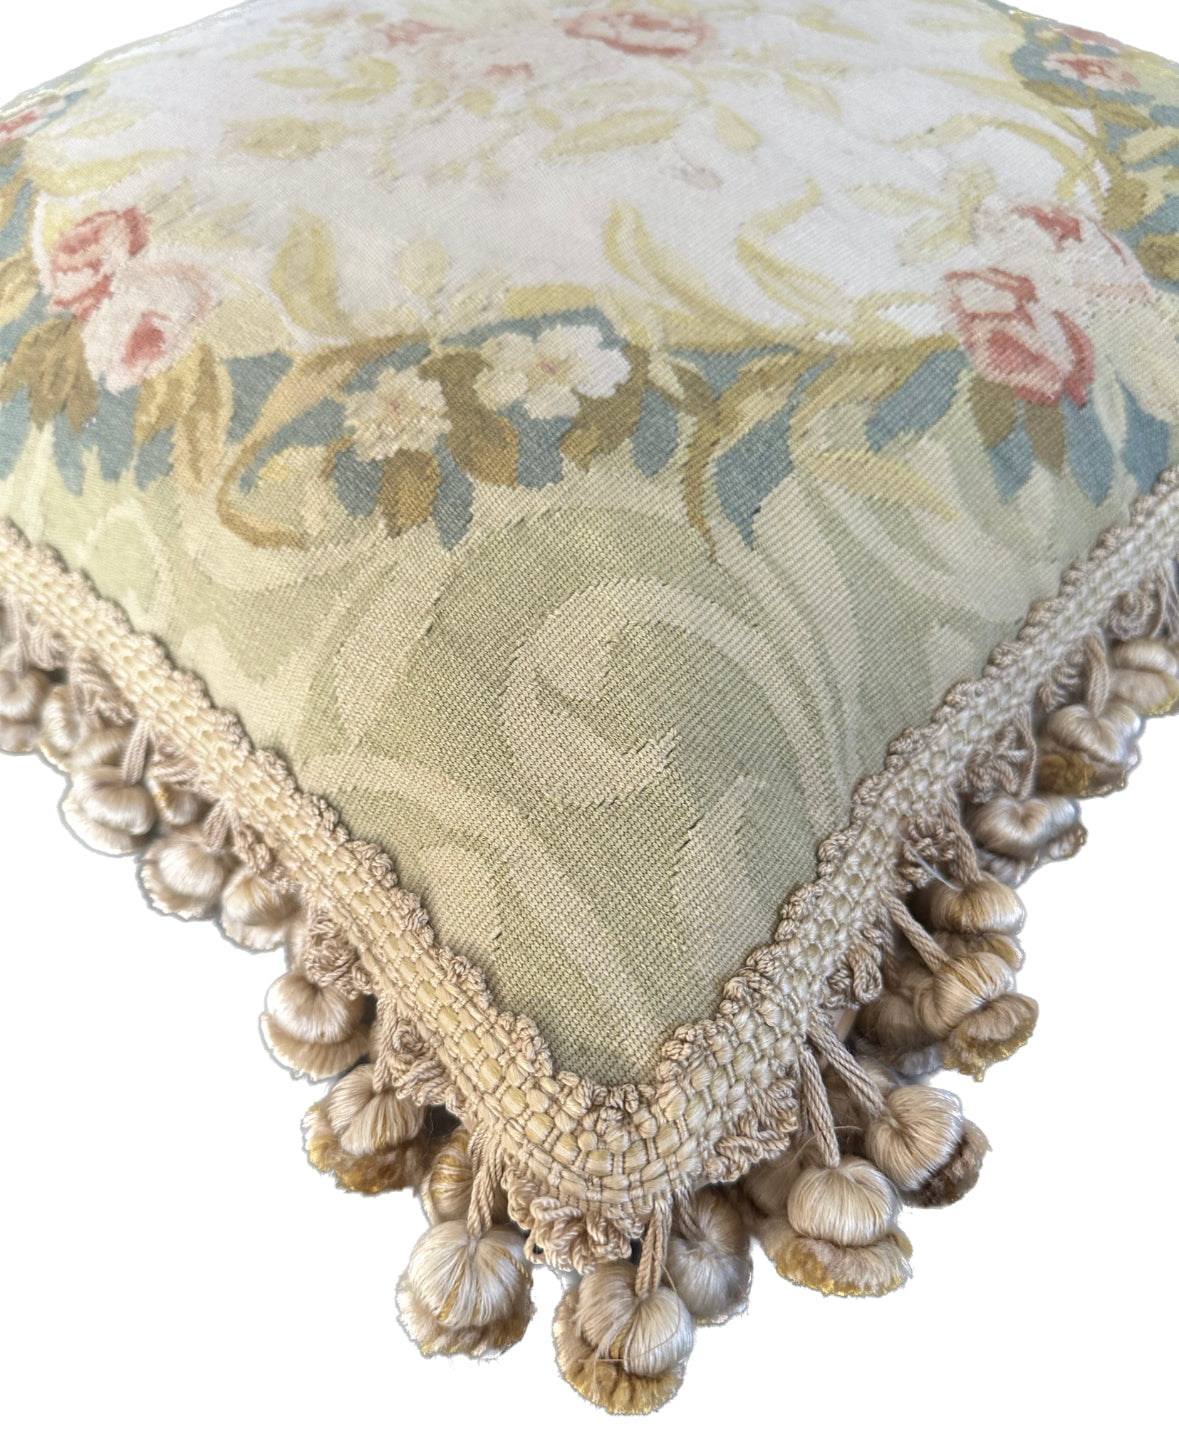 19" x 19" Green Beige Floral Wool and Silk Aubusson Pillow